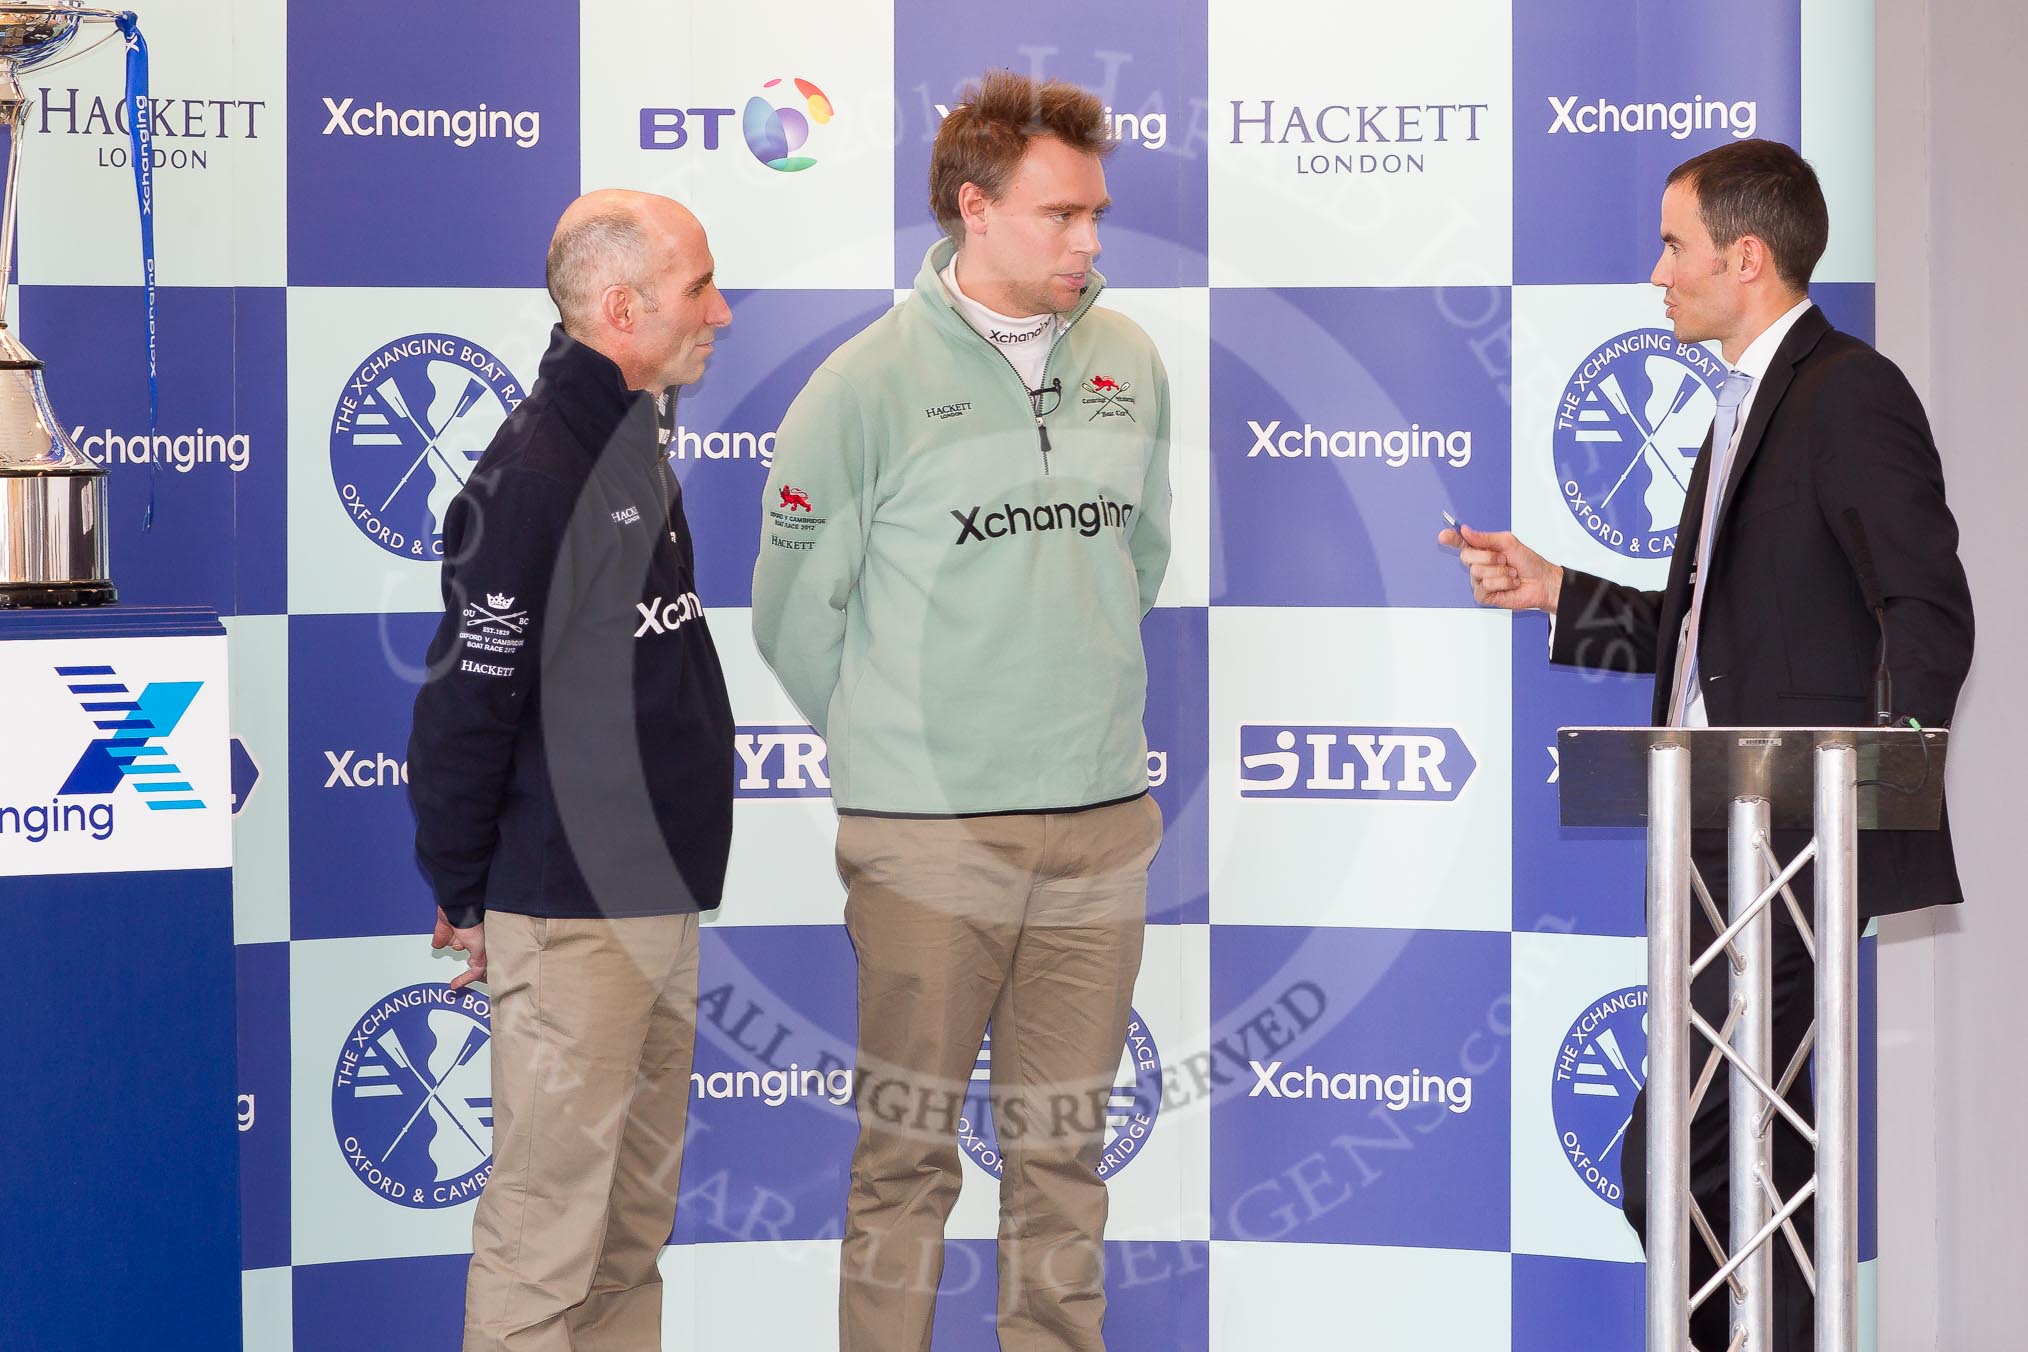 The Boat Race season 2012 - Crew Announcement and Weigh In: The coaches of both squads, Sean Bowden (OUBC) and Steve Trapmore (CUBC) being interviewed by Andrew Cotter..
Forman's Fish Island,
London E3,

United Kingdom,
on 05 March 2012 at 10:23, image #41